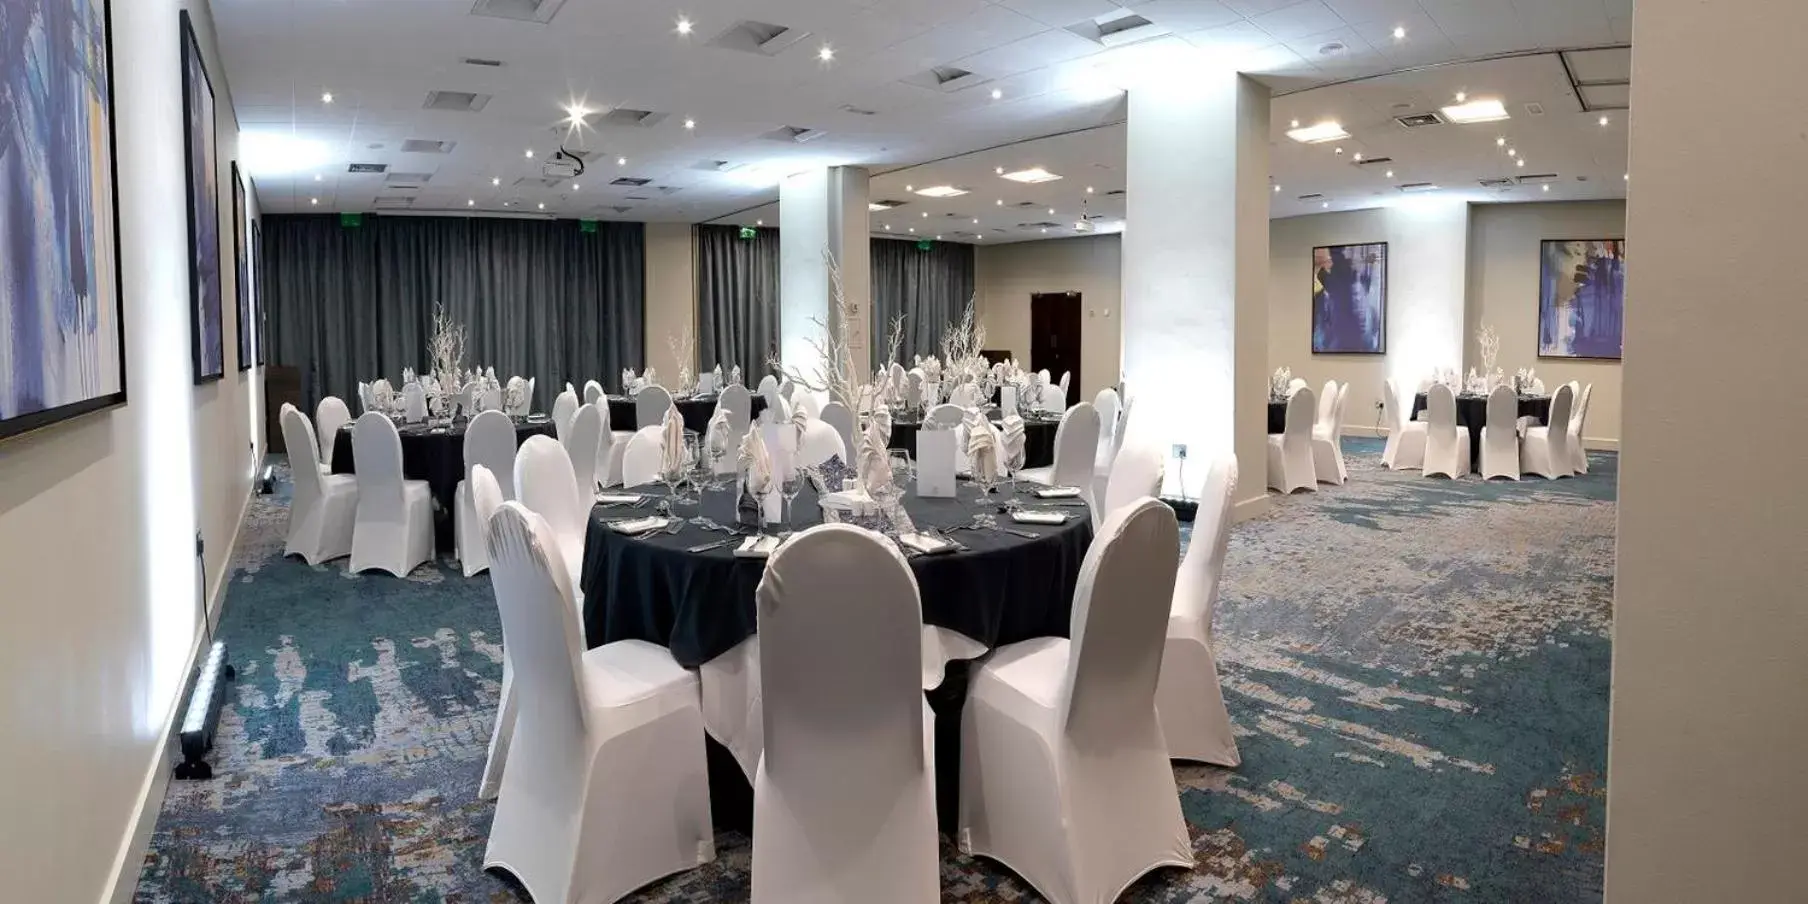 Meeting/conference room, Banquet Facilities in Crowne Plaza Stratford-upon-Avon, an IHG Hotel